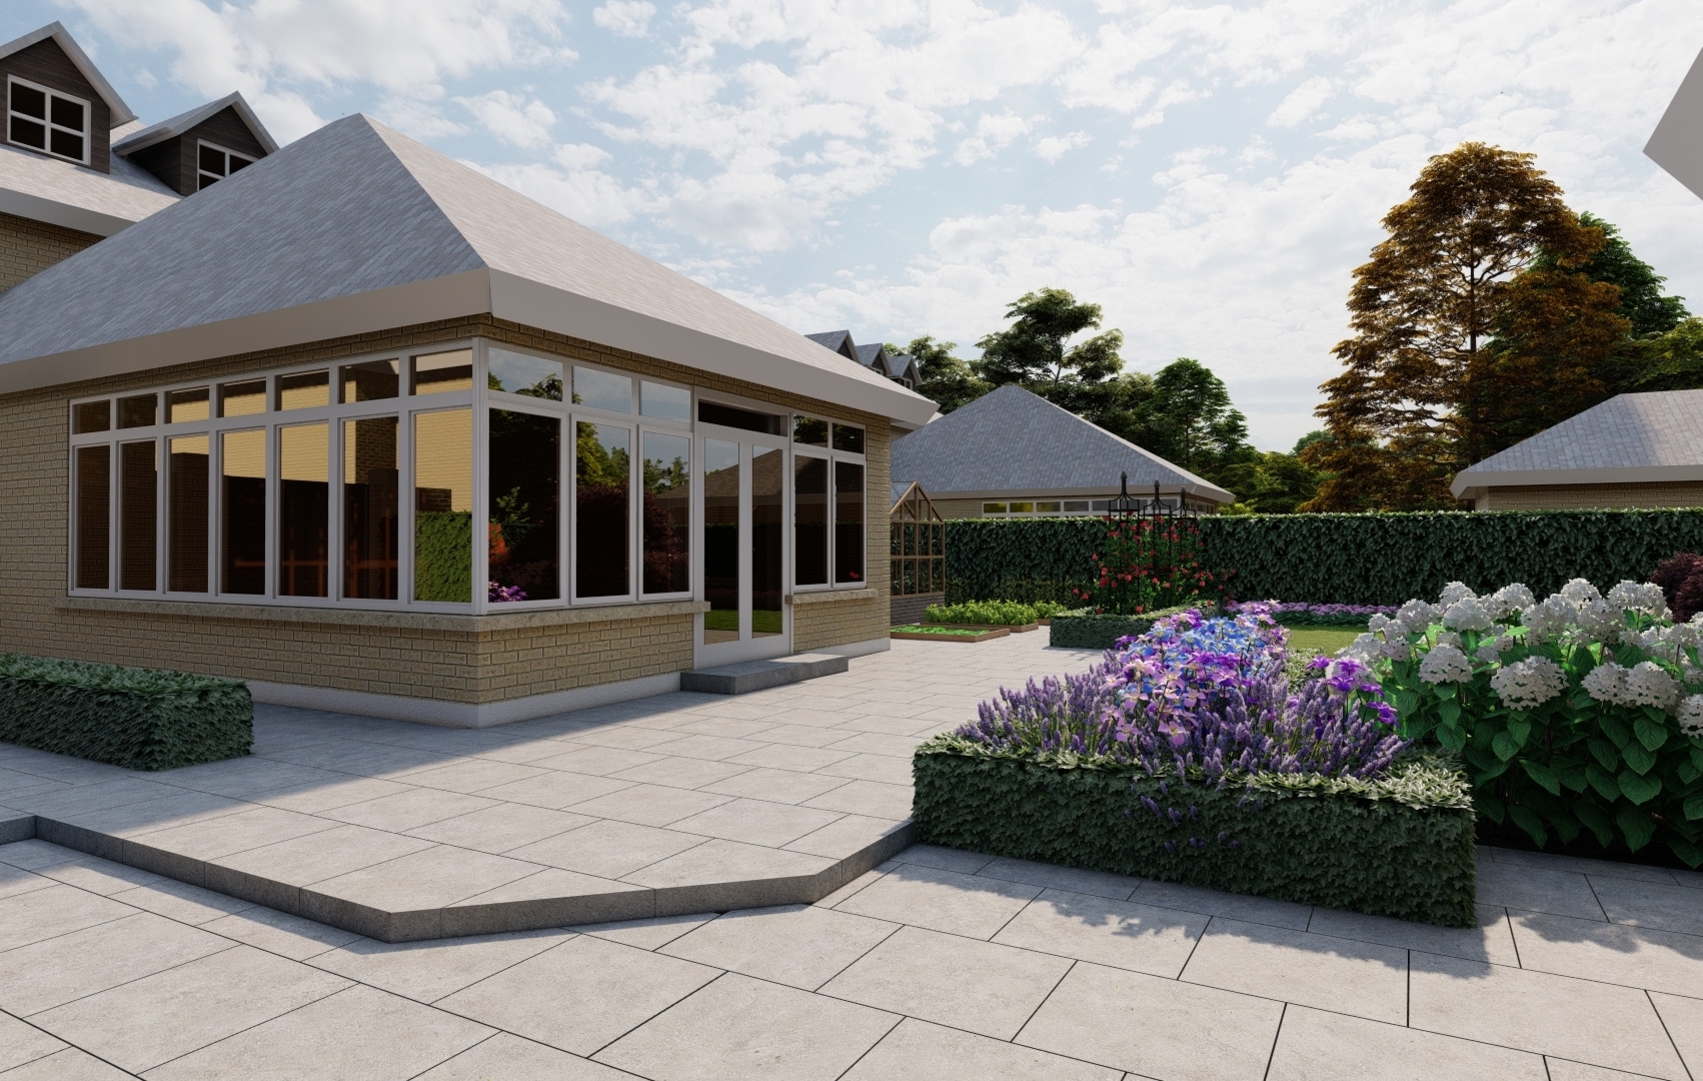 Family Garden layout includes a range of outdoor seating, dining and patio areas with lush & colourful planted beds  | Malahide, Co Dublin